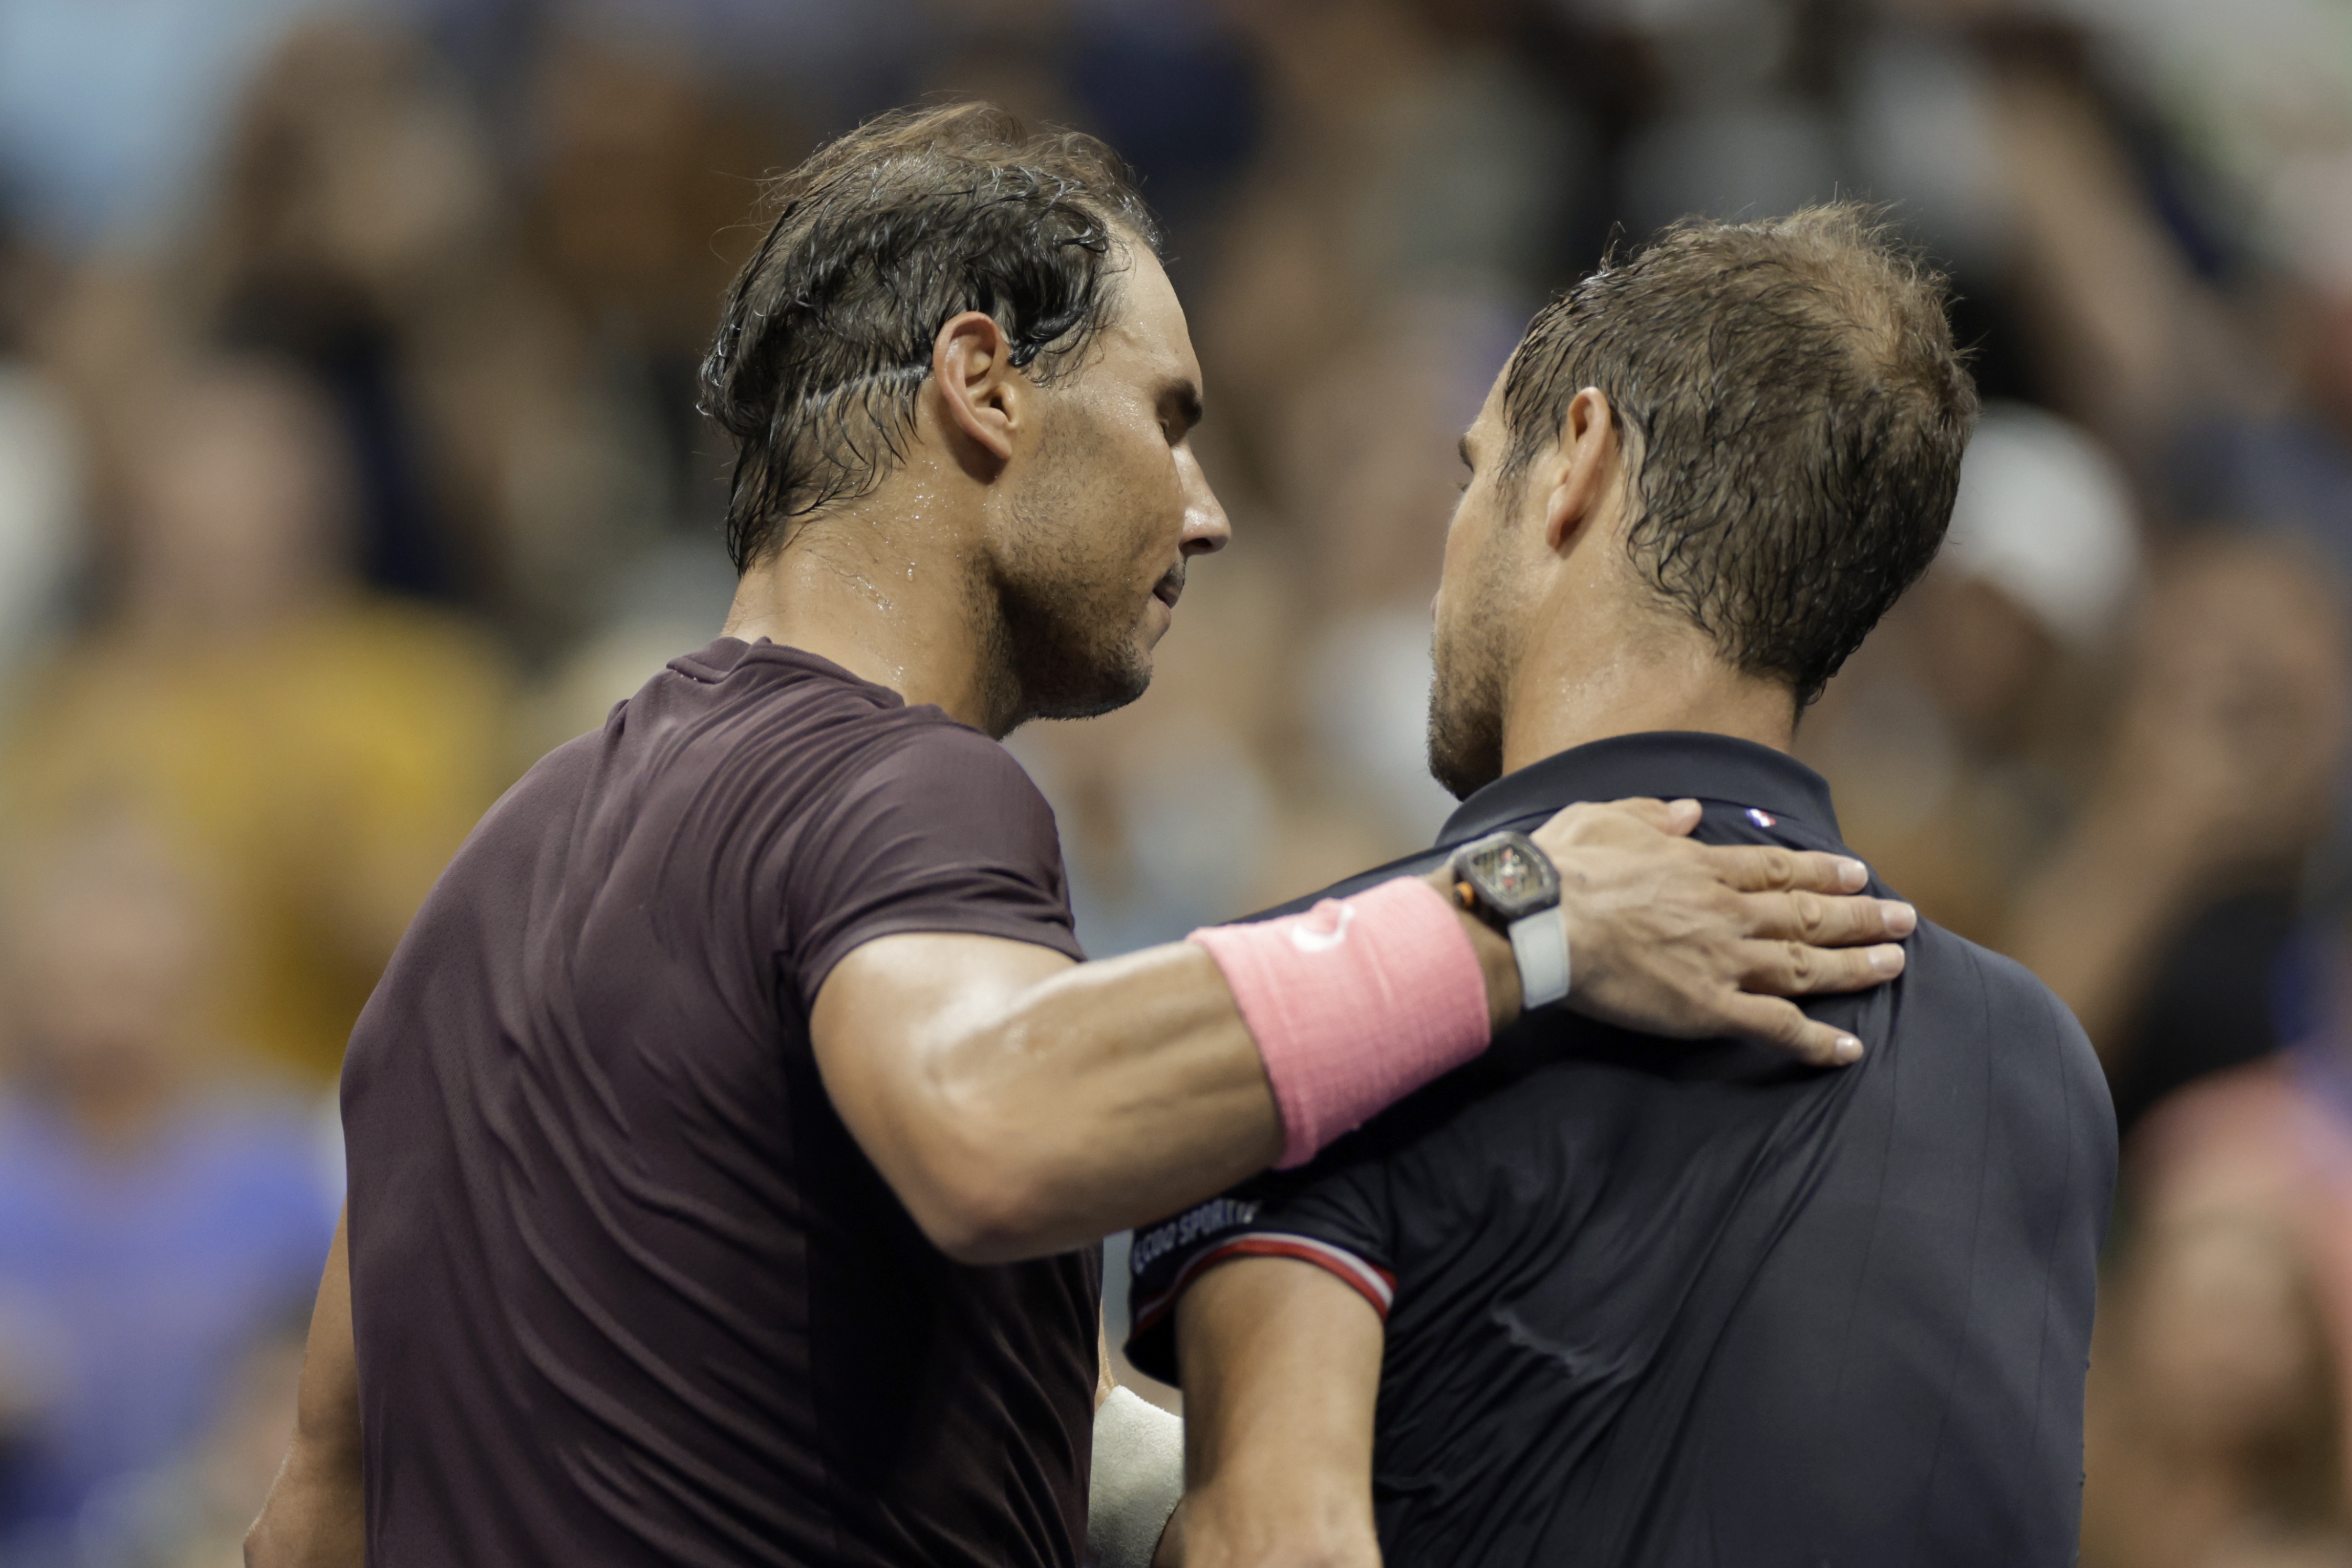 Rafael Nadal, left, of Spain, and Richard Gasquet, of France, greet each other after their match during the third round of the U.S. Open tennis championships, Saturday, Sept. 3, 2022, in New York. Nadal won the match. (AP Photo/Adam Hunger)